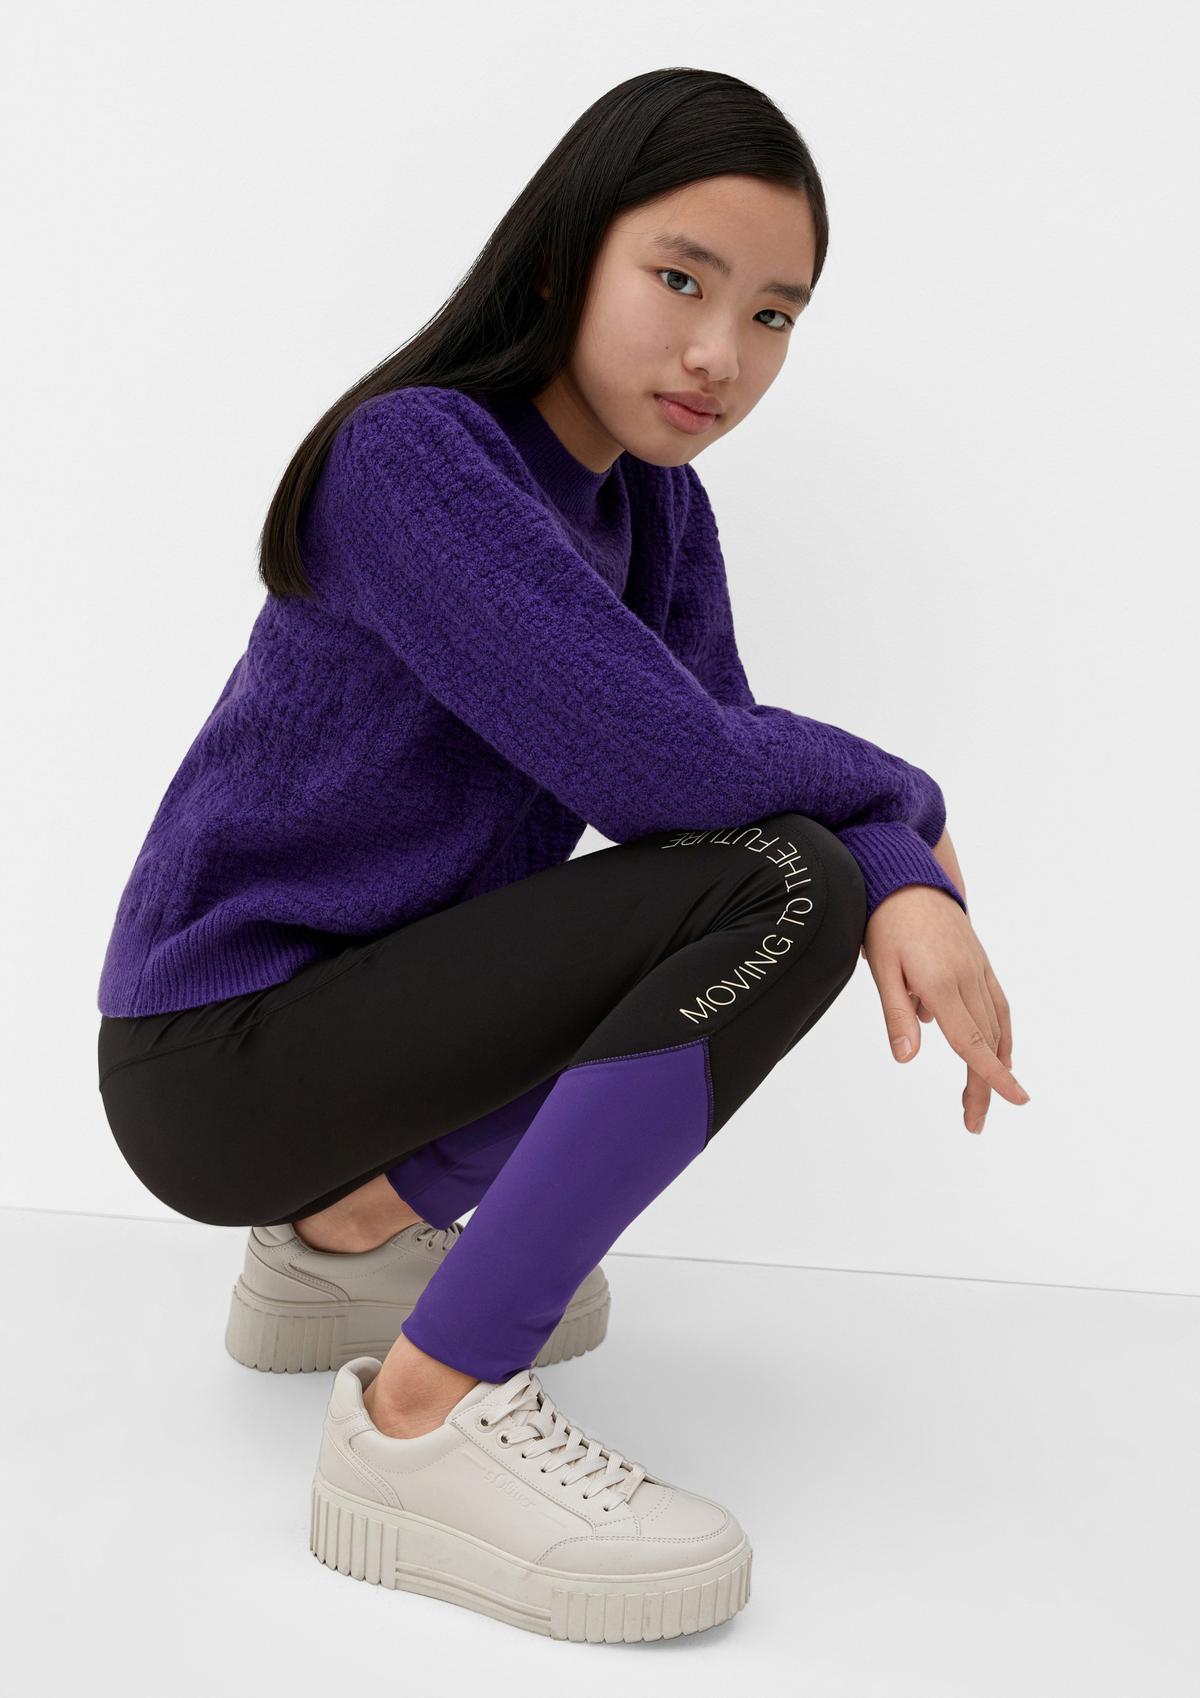 s.Oliver Slim fit: Leggings with printed lettering